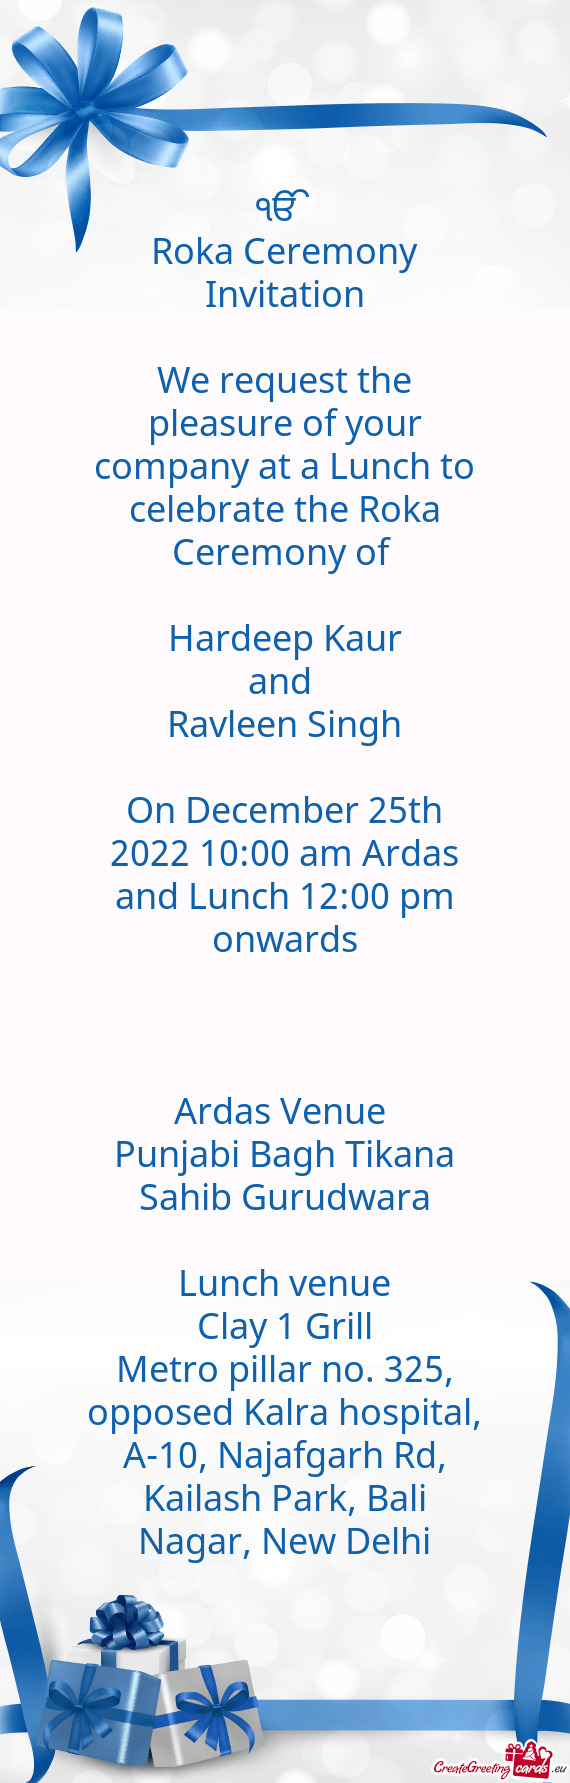 On December 25th 2022 10:00 am Ardas and Lunch 12:00 pm onwards